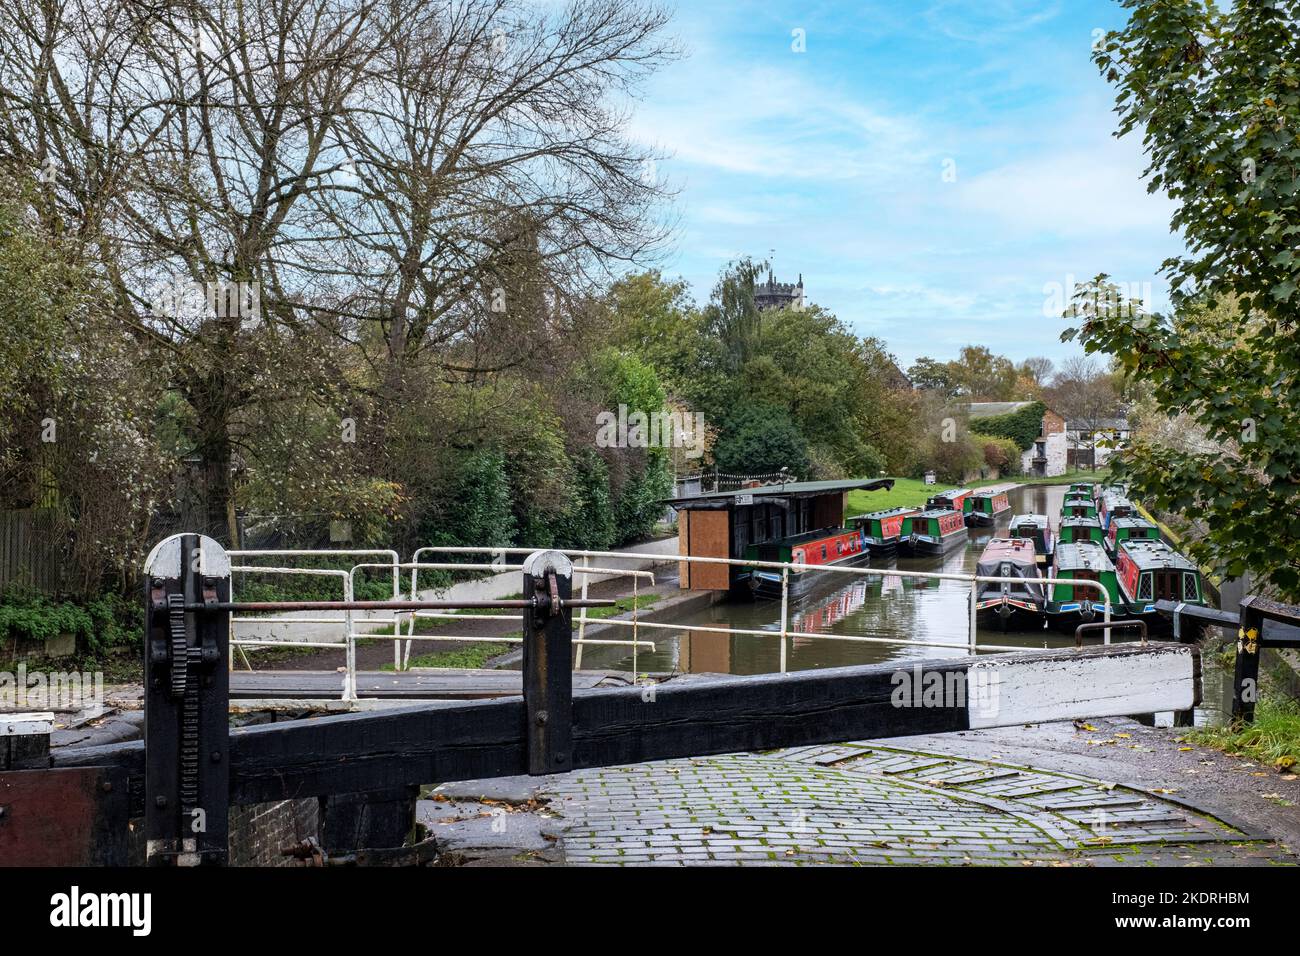 Narrow boats with lock on the Trent & Mersey canal with St Michael Church in distance, Middlewich Cheshire UK Stock Photo